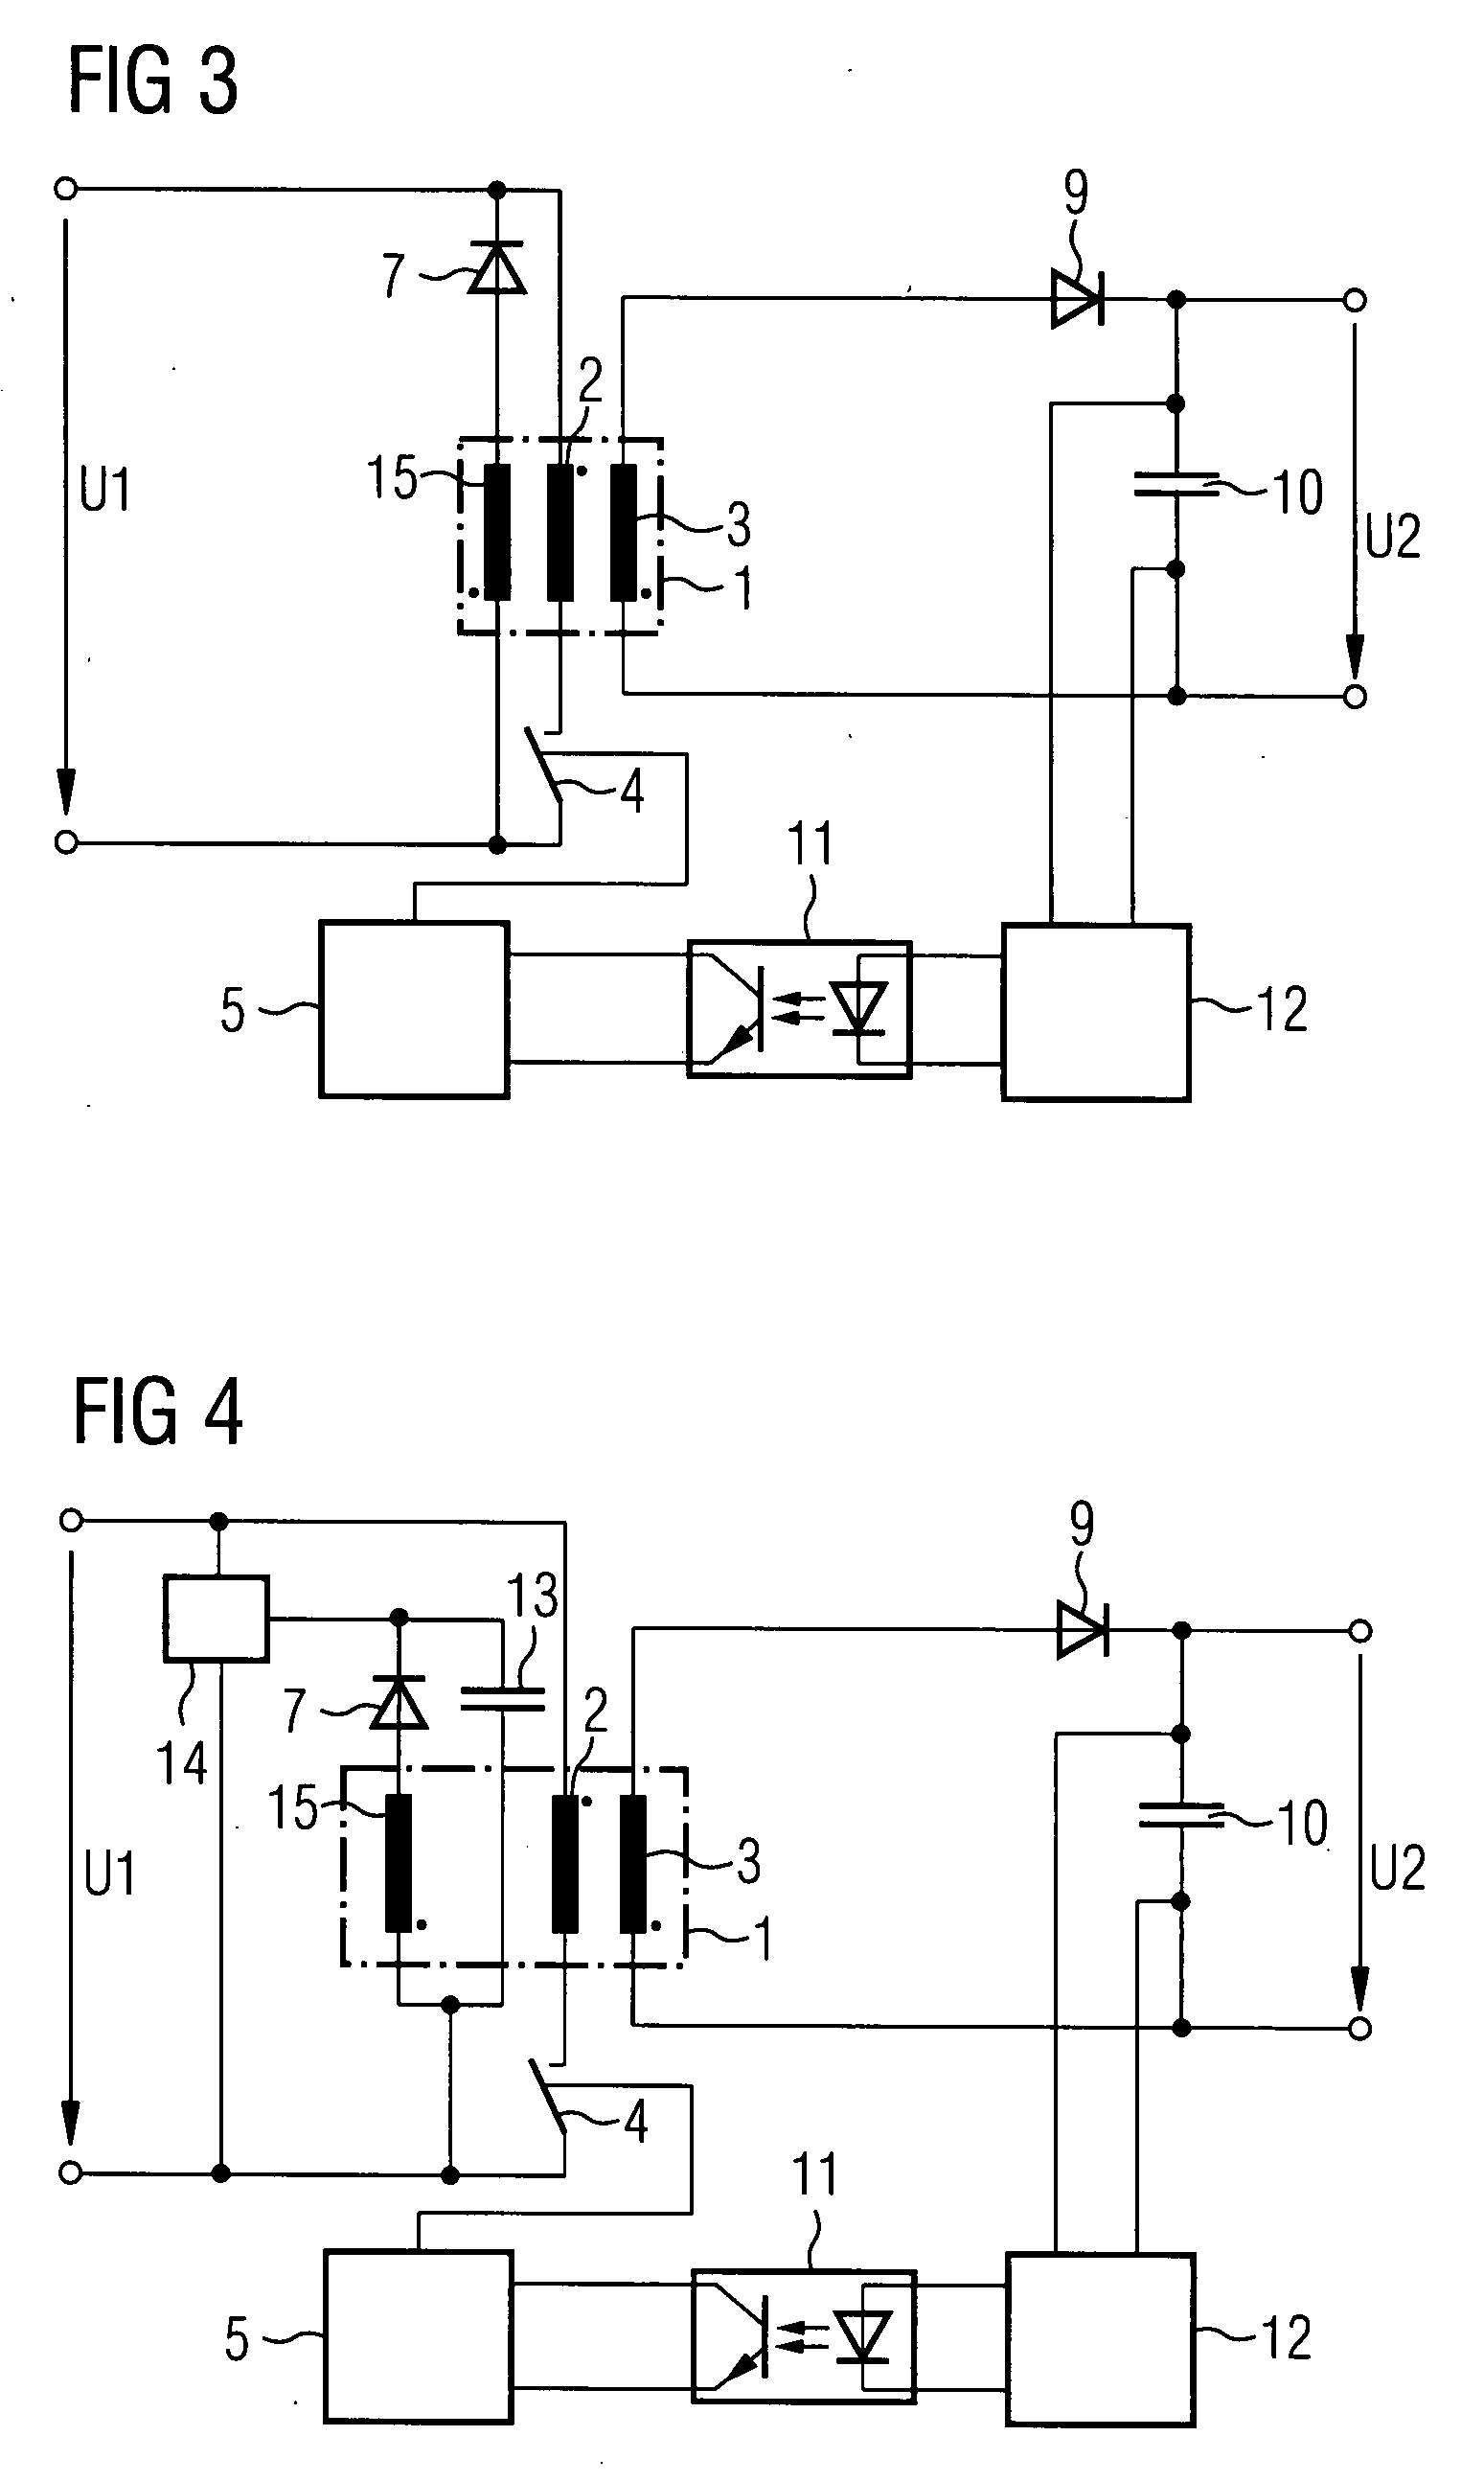 Method for Operating a Switched Mode Power Supply With Return of Primary-Side Stray Energy